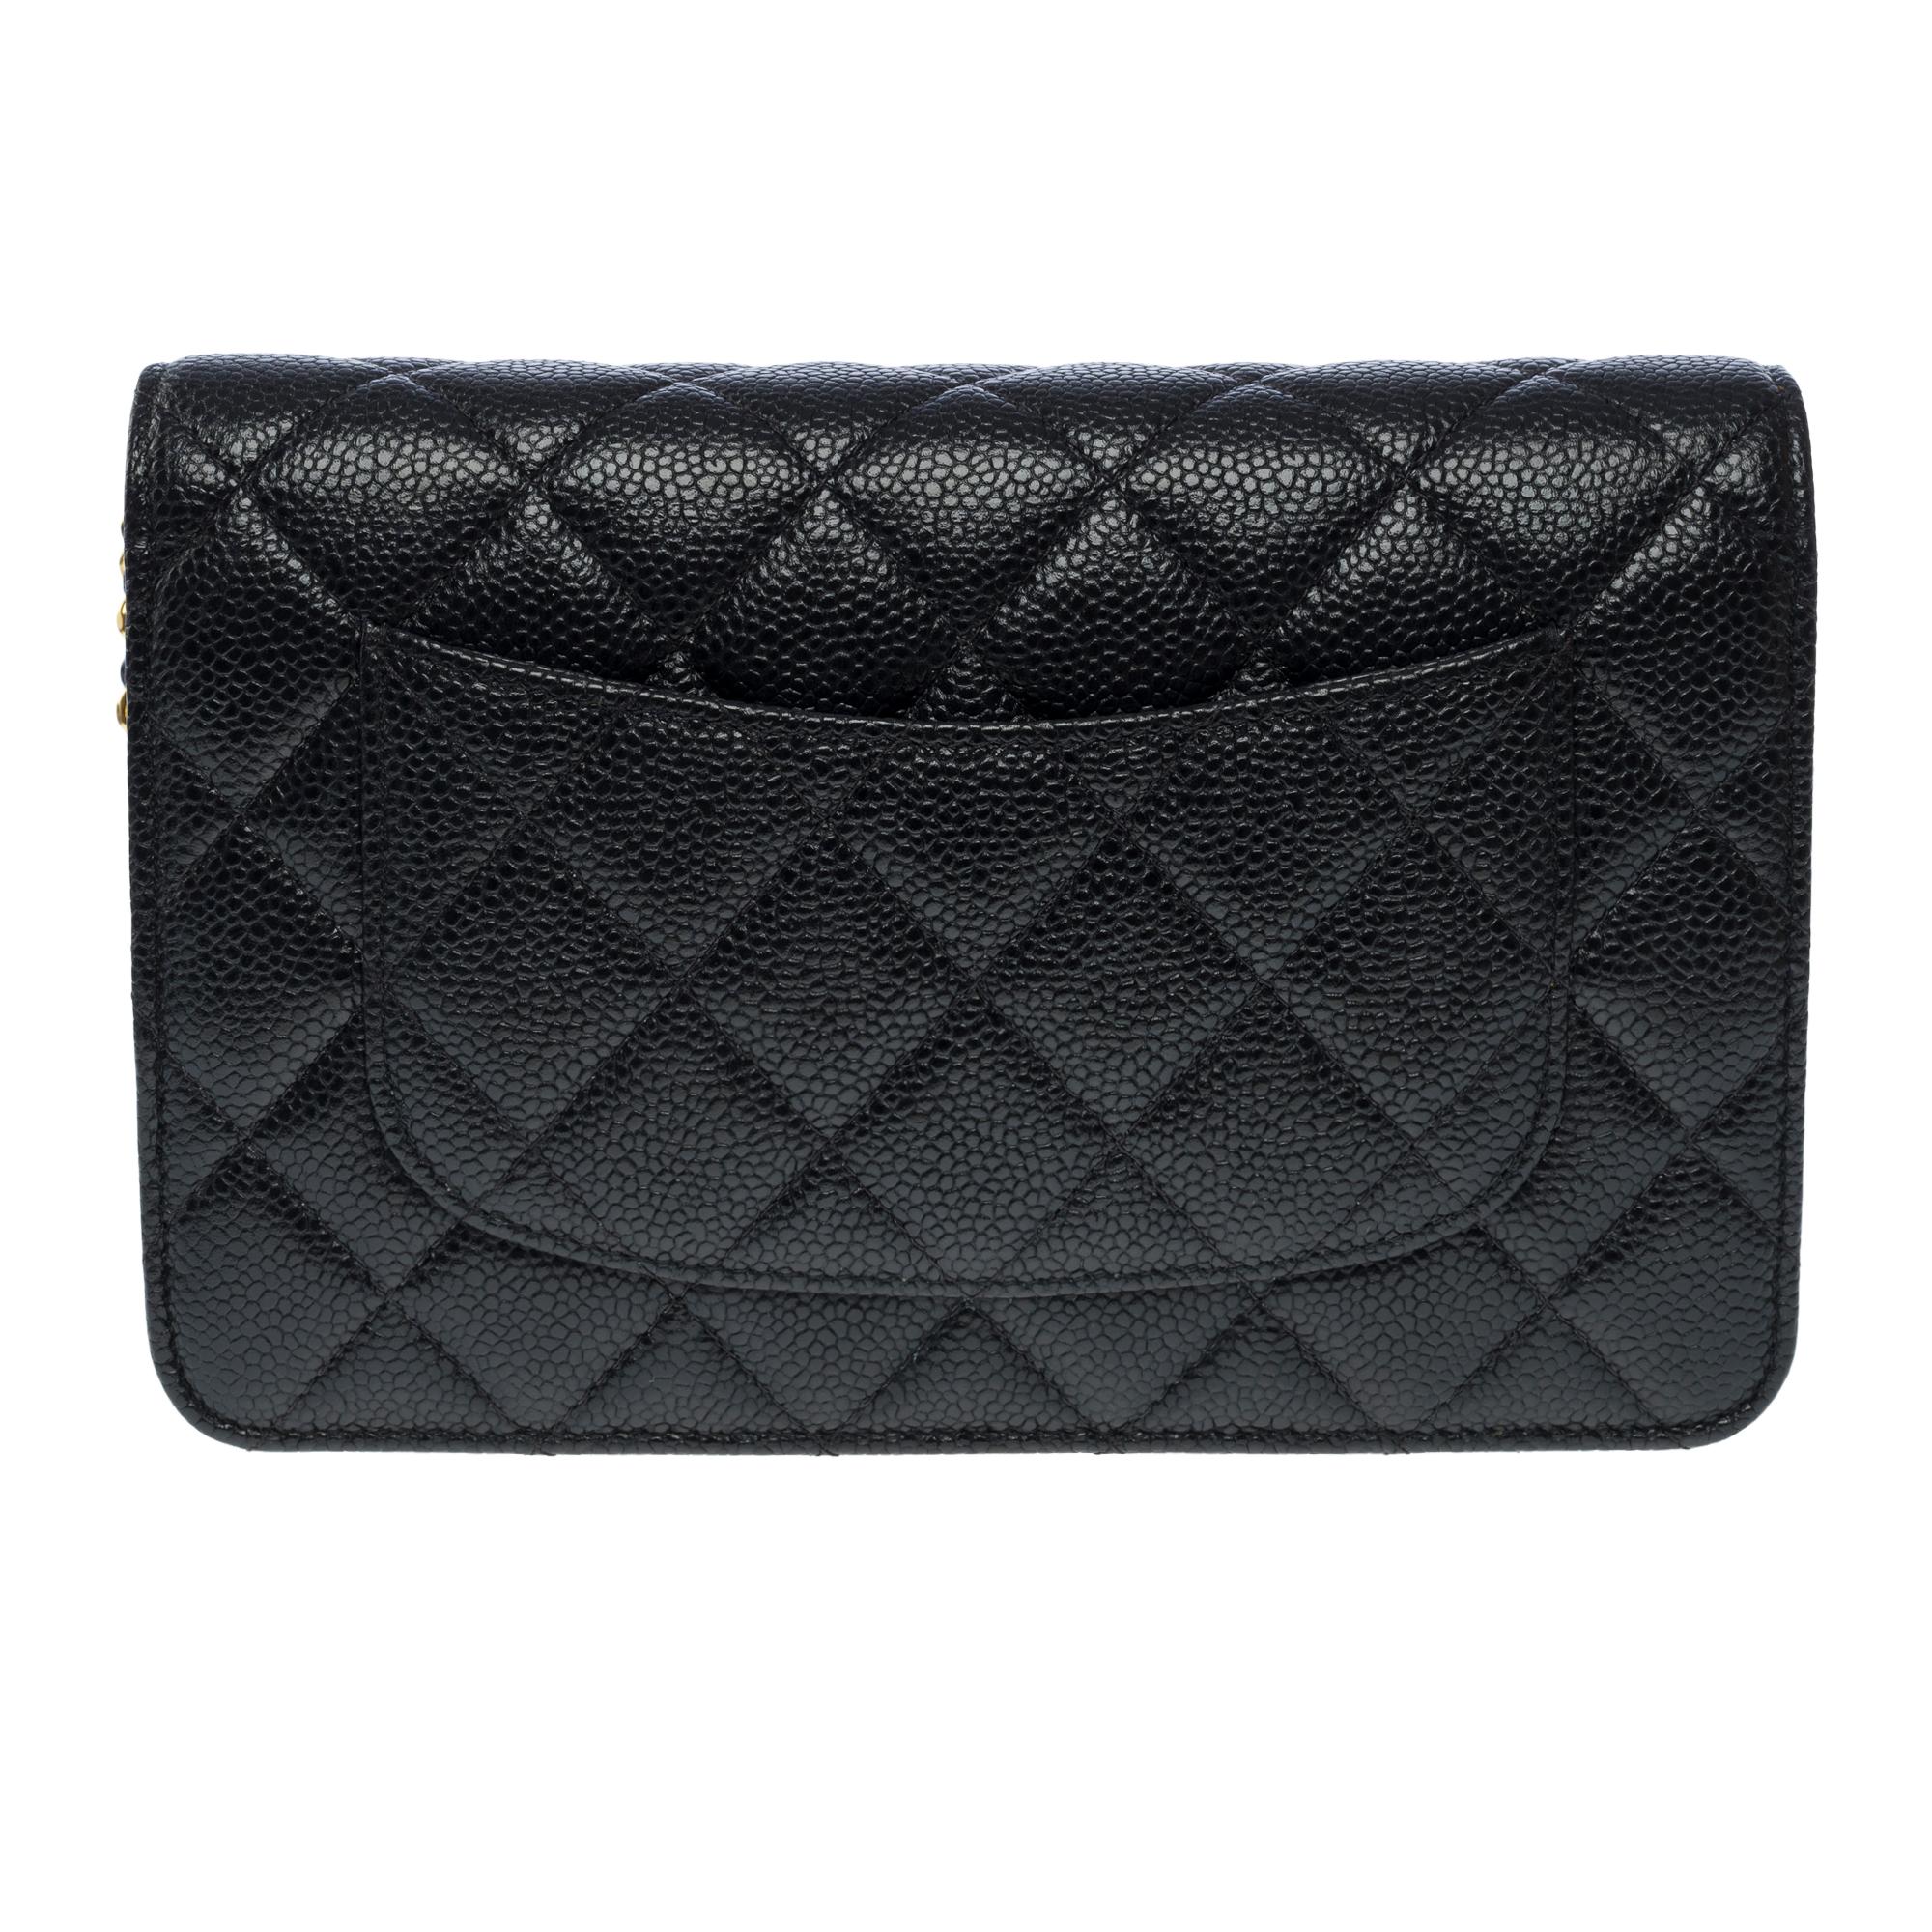 Women's Chanel Wallet on Chain (WOC)  shoulder bag in Black quilted Caviar leather, GHW For Sale